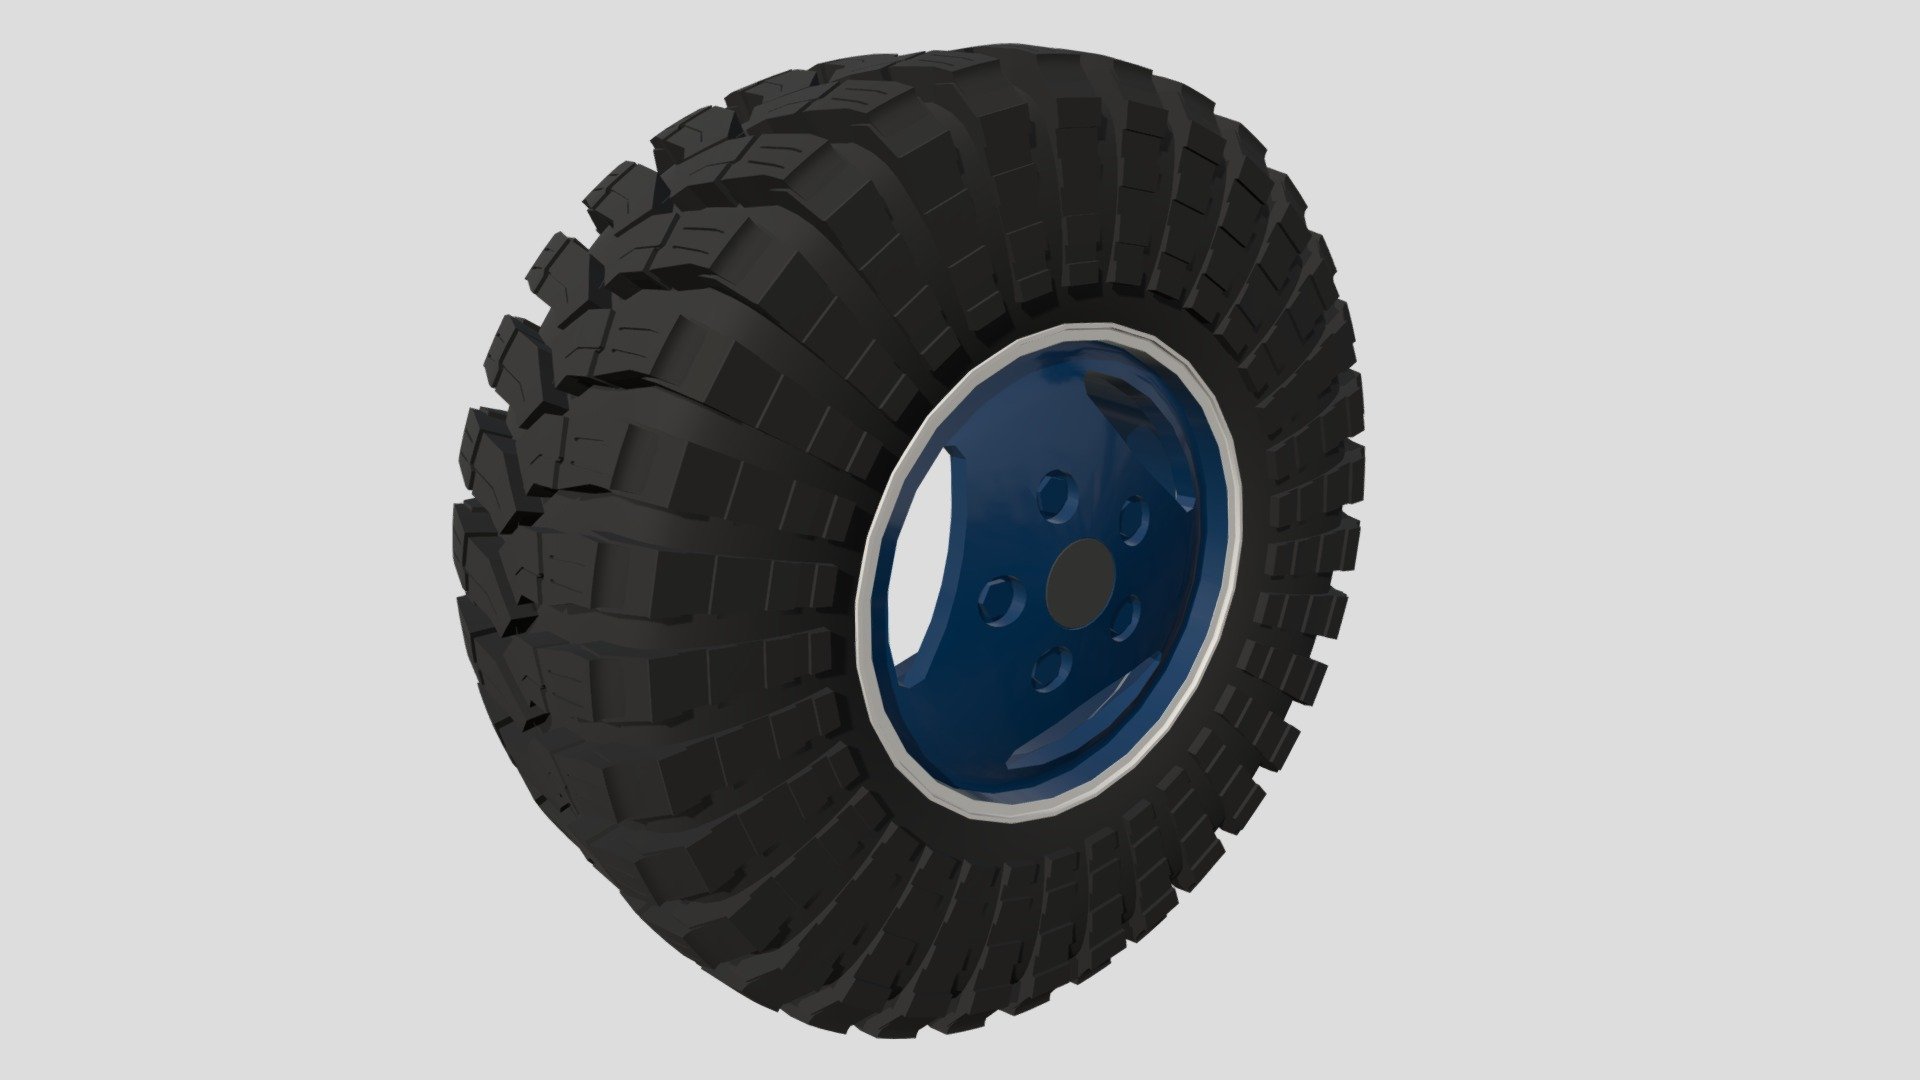 Range Rover Classic Wheel Maxxis Trepador 3d model rendered with Cycles in Blender, as per seen on attached images.

File formats:
-.blend, rendered with cycles, as seen in the images;
-.obj, with materials applied;
-.dae, with materials applied;
-.fbx, with material slots applied;
-.stl;

Files come named appropriately and split by file format.

3D Software:
The 3D model was originally created in Blender 2.79 and rendered with Cycles.

Materials and textures:
The models have materials applied in all formats, and are ready to import and render.

Preview scenes:
The preview images are rendered in Blender using its built-in render engine &lsquo;Cycles'.
Note that the blend files come directly with the rendering scene included and the render command will generate the exact result as seen in previews.
Scene elements are on a different layer from the actual model for easier manipulation of objects 3d model